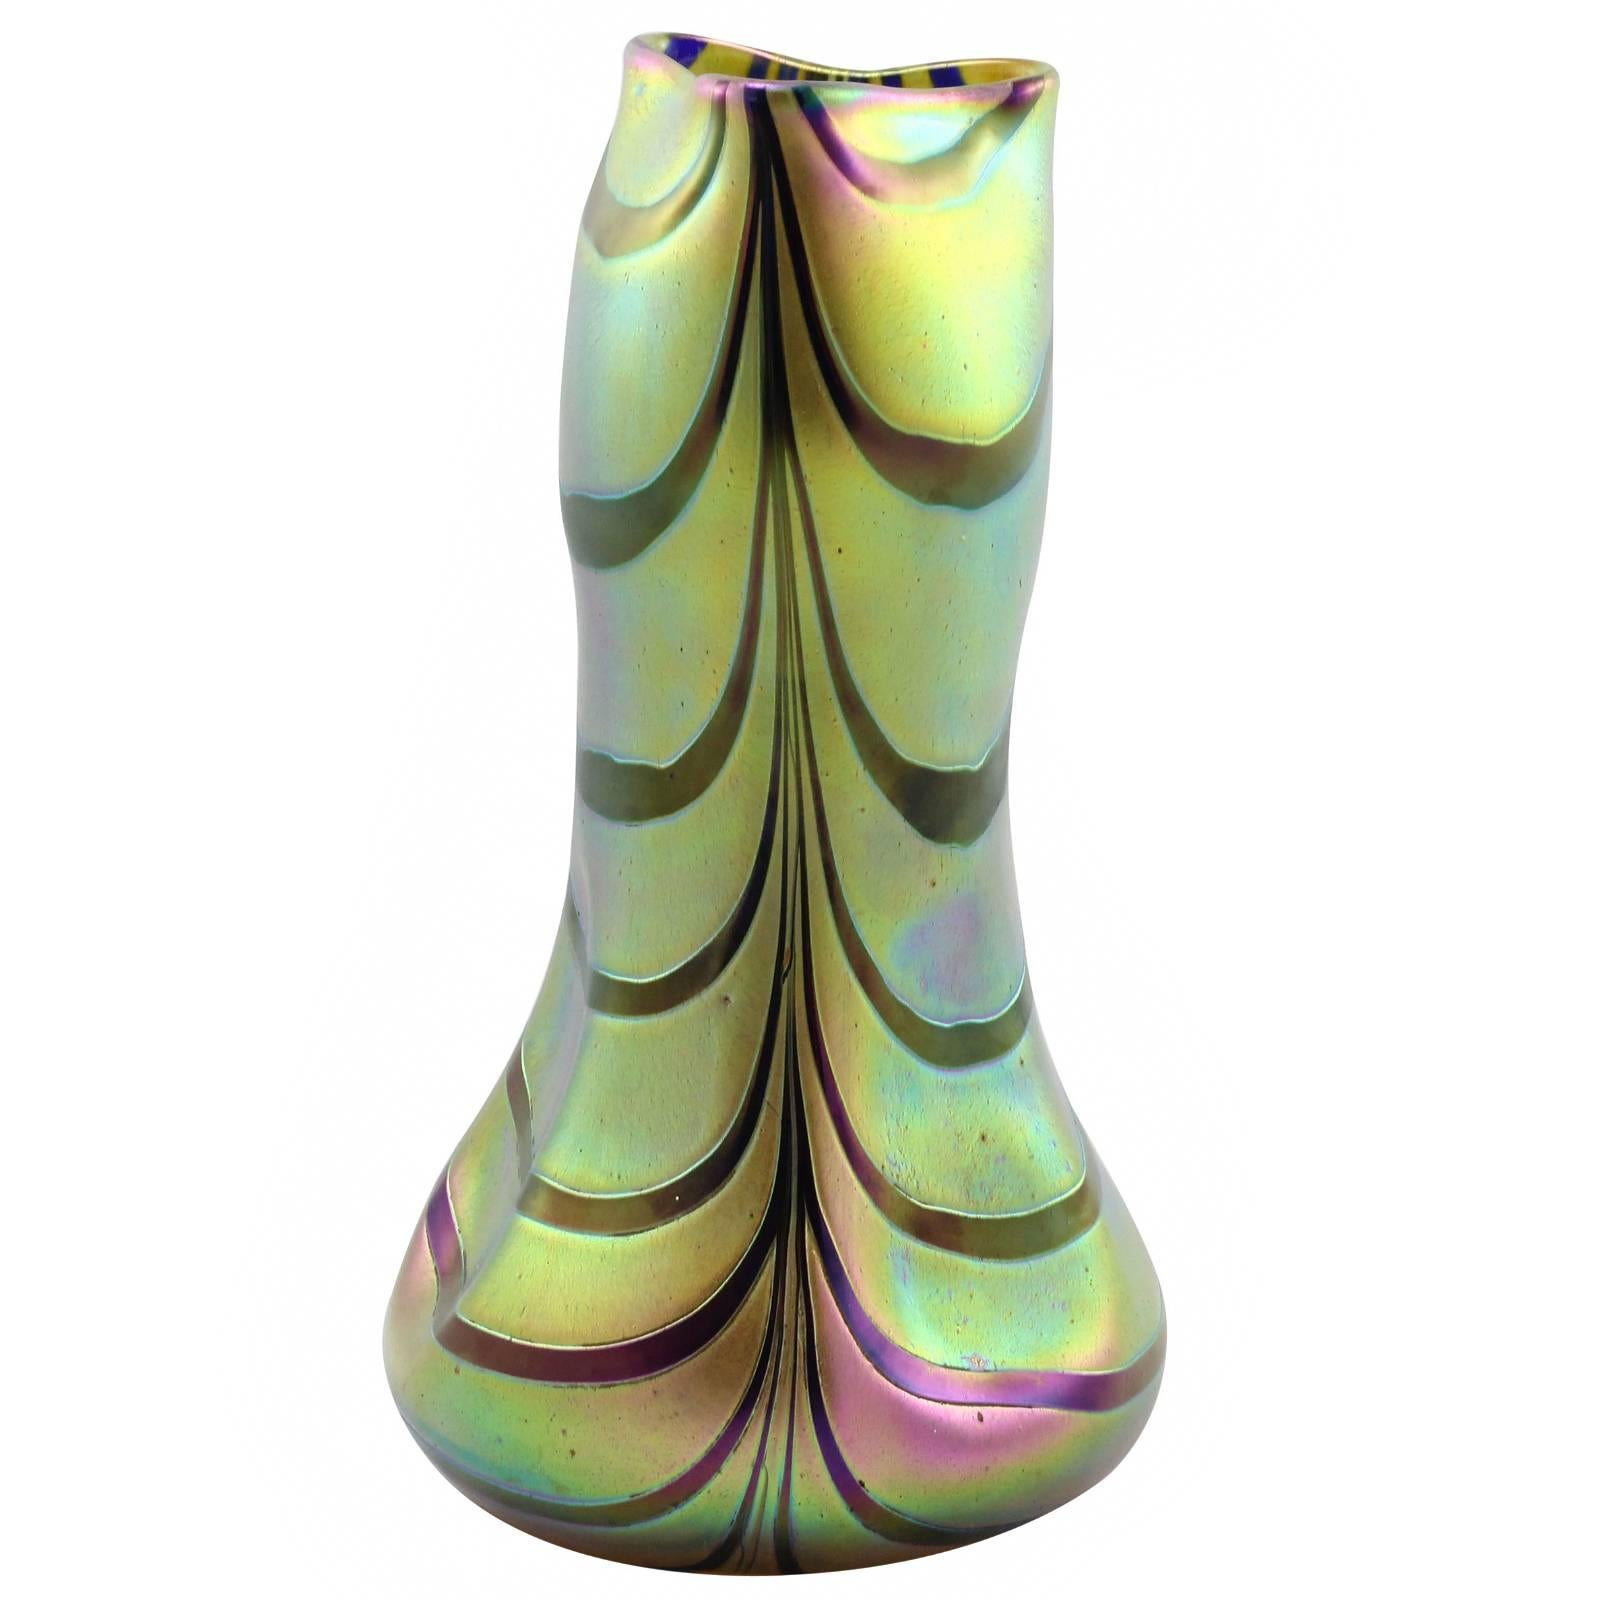 An early 20th century green to yellow iridescent glass vase with violet stripes by Bohemian glass manufacturer Kralik. The distinctive shape of this vase with a globular foot and cabochon indentations indicates this vase was clearly made by the